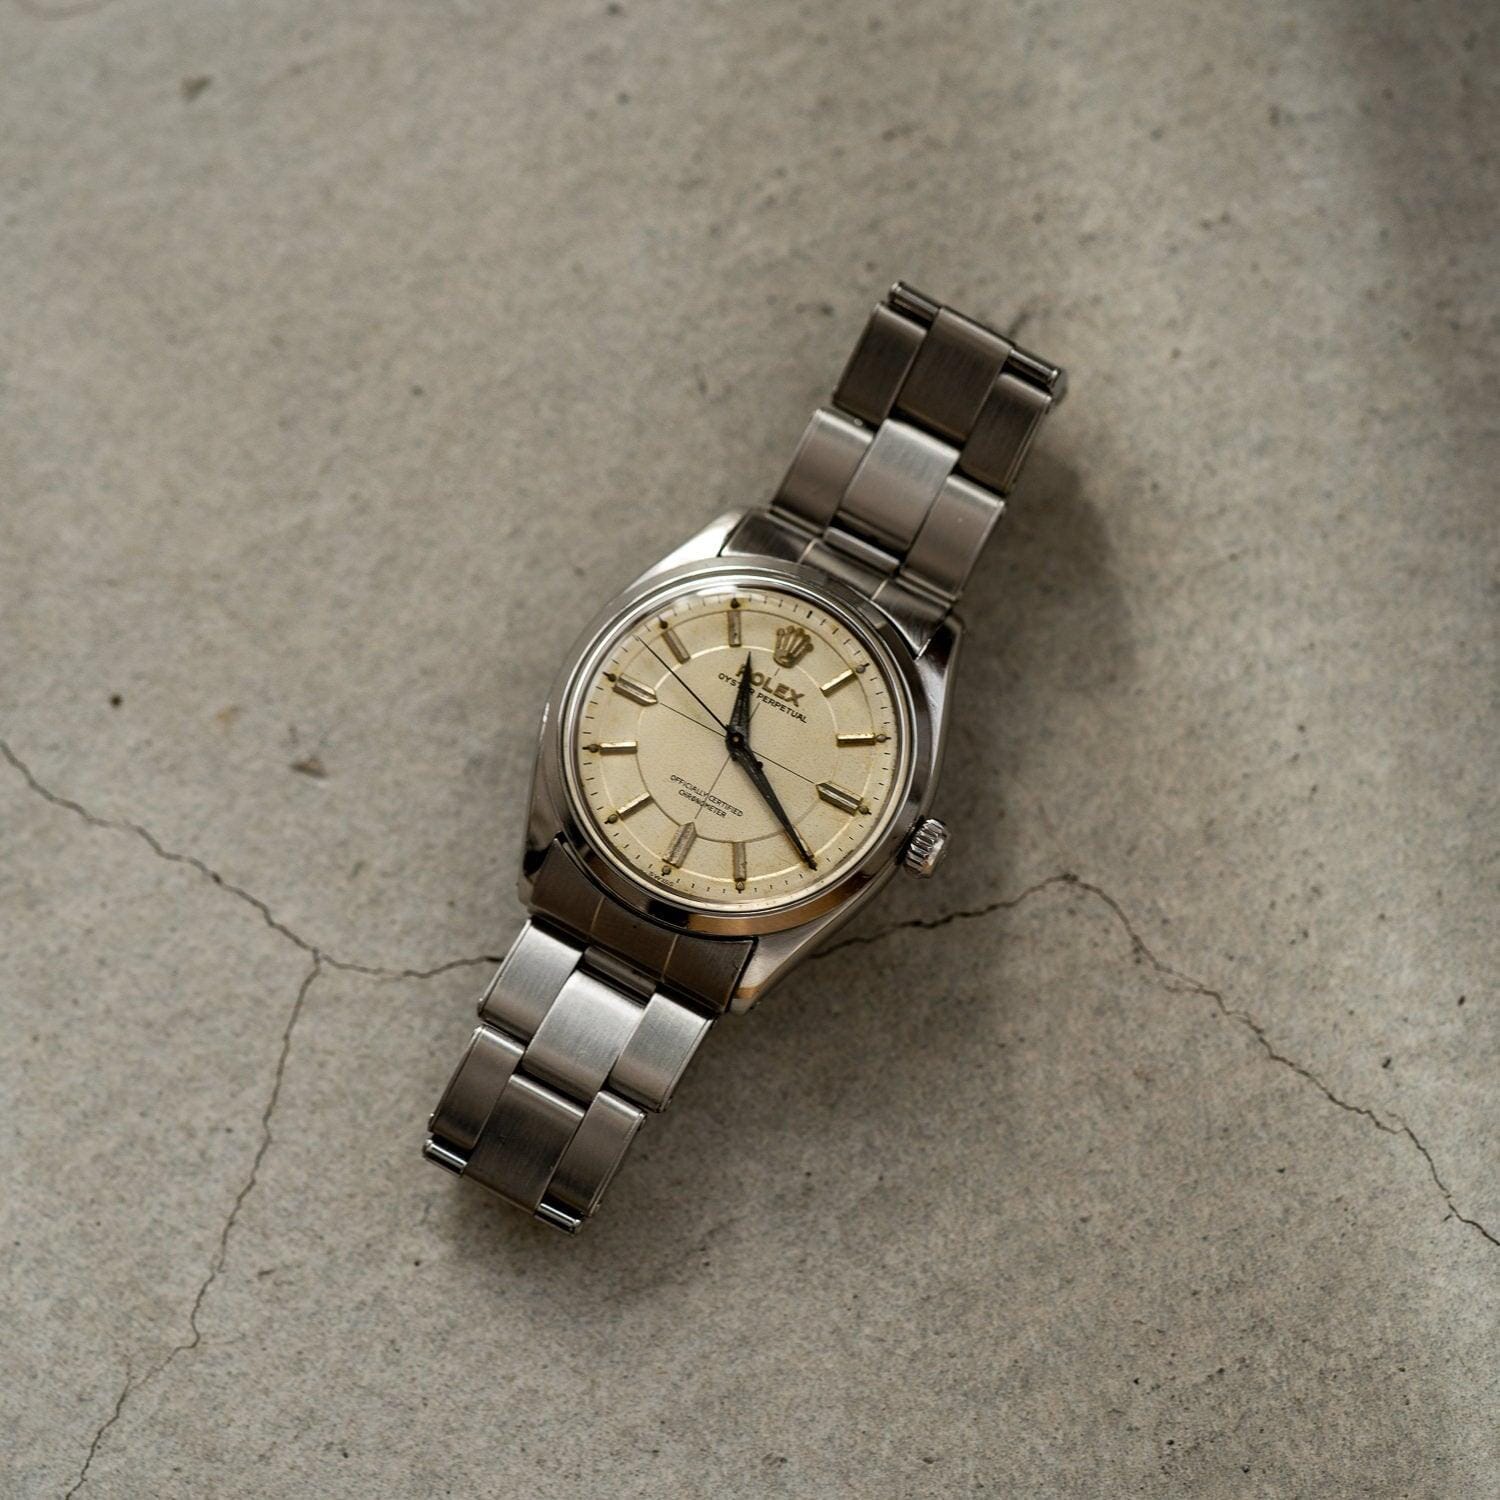 ROLEX Oyster Perpetual 6564 Sector Dial - Arbitro